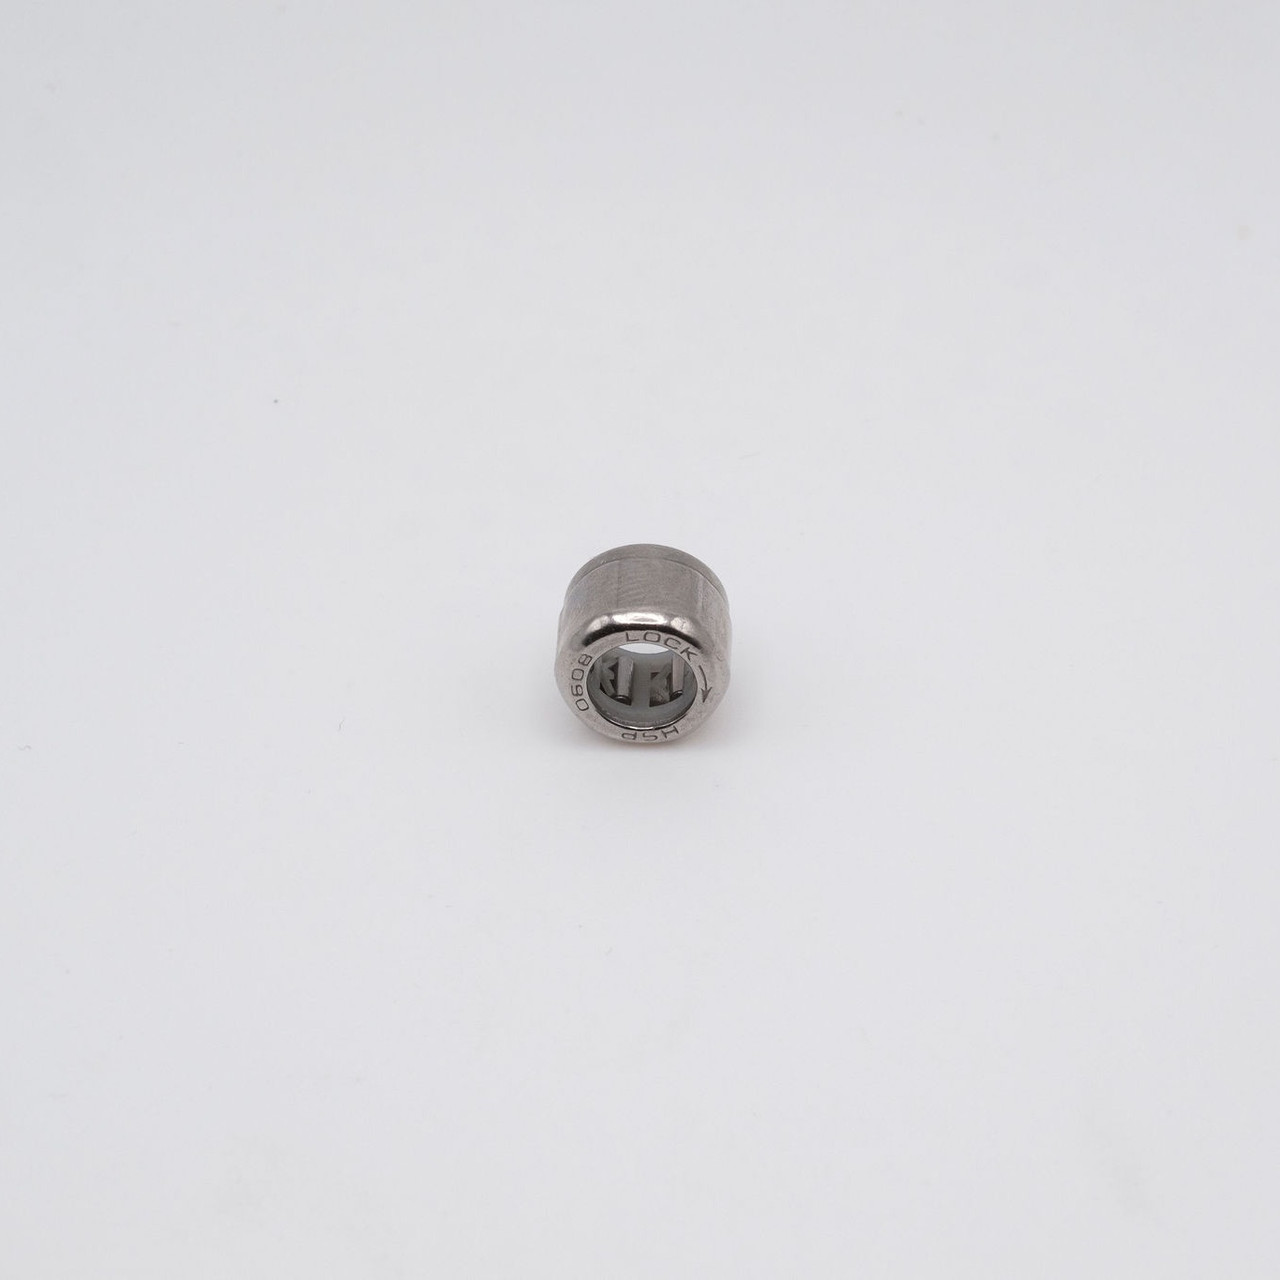 1WC0608 One-Way Needle Roller Bearing 6x10x8mm Front View